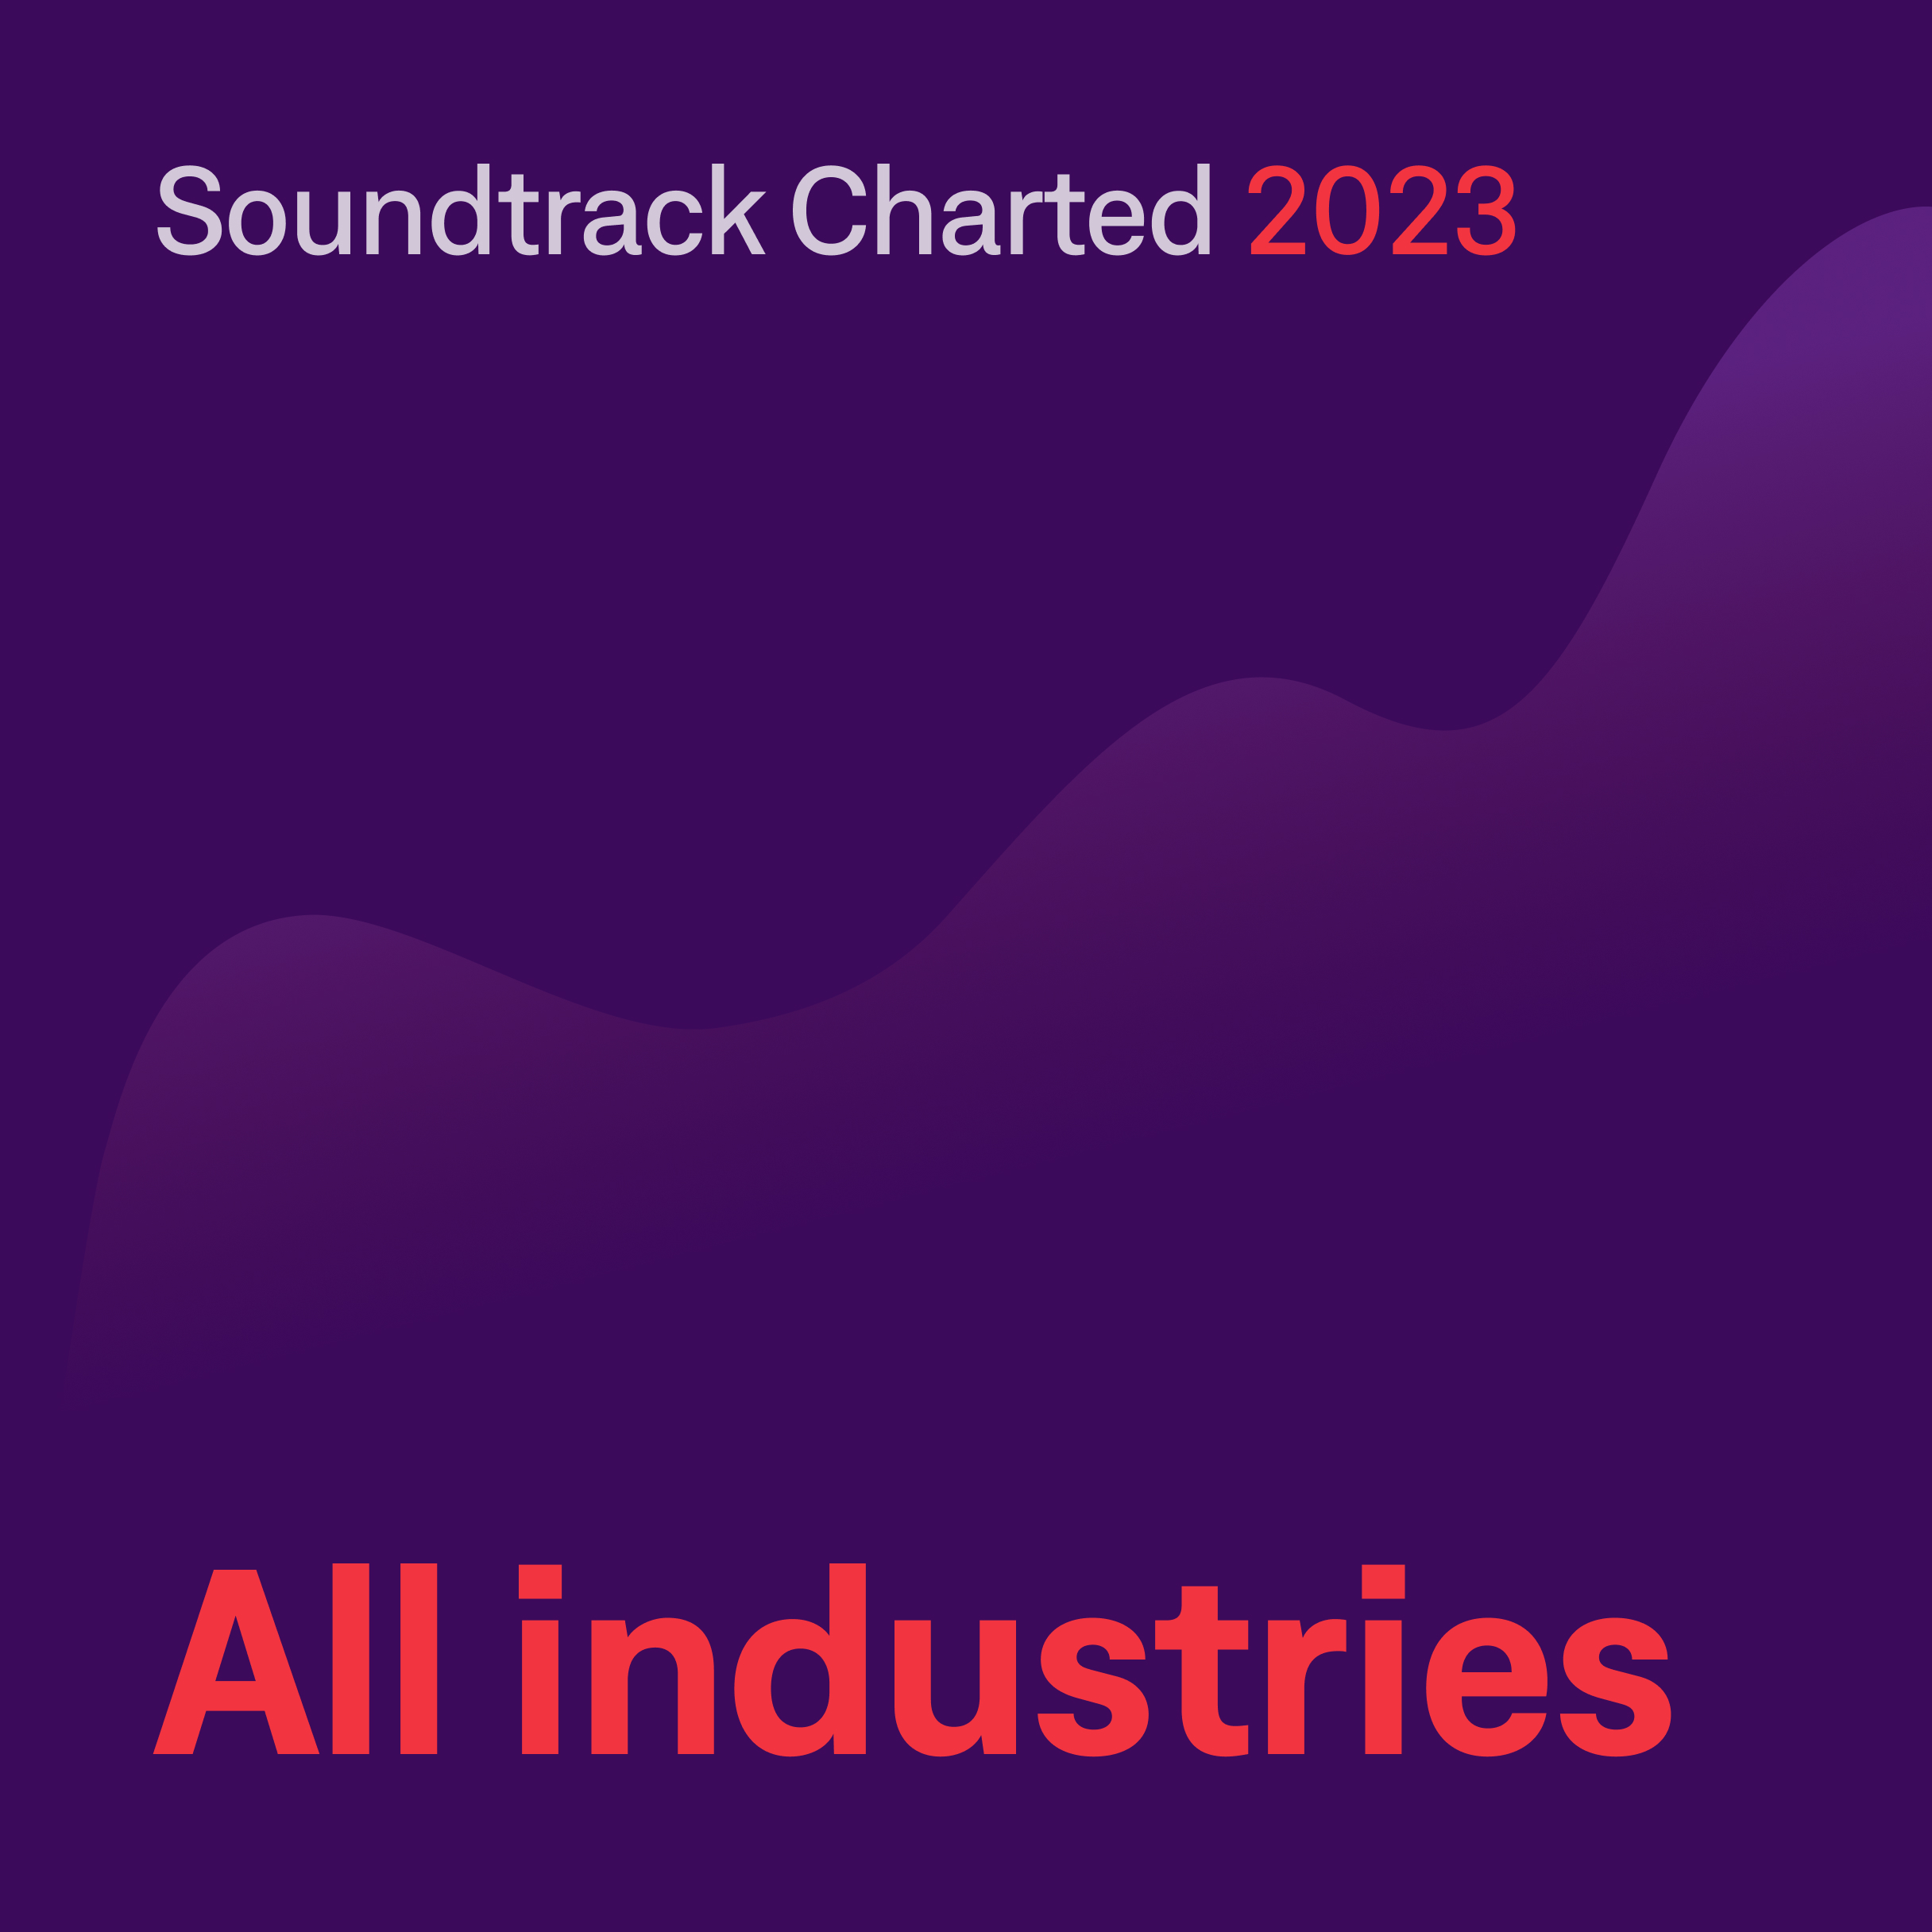 Soundtrack Charted 2023 - all